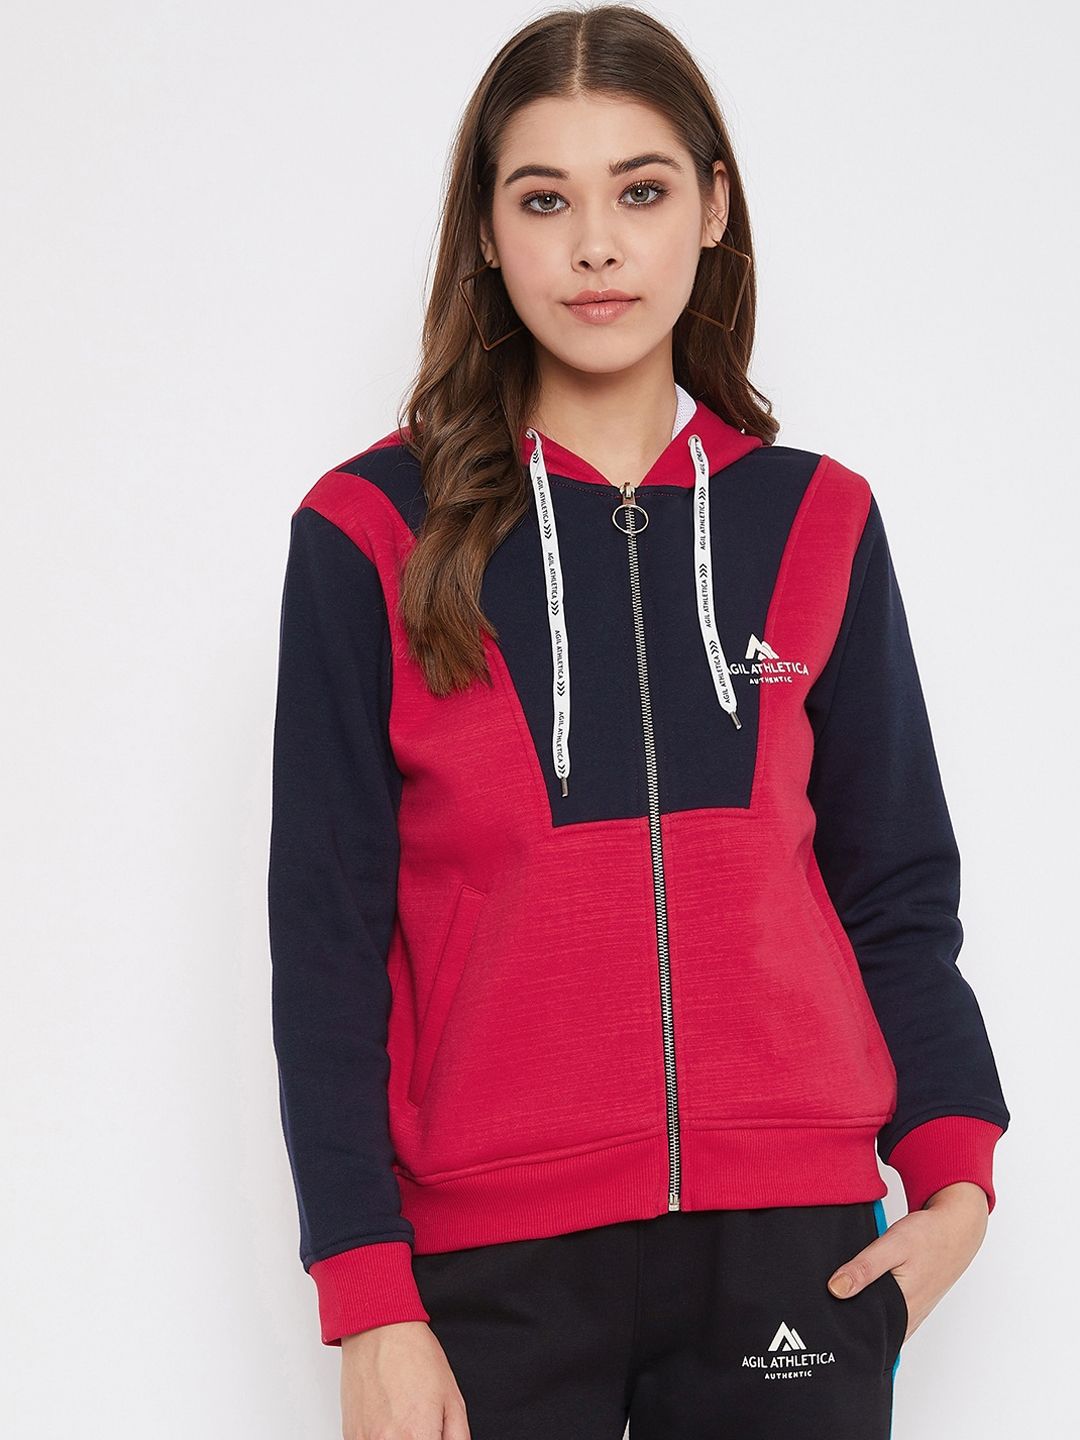 AGIL ATHLETICA Women Red Colourblocked Lightweight Tailored Jacket Price in India